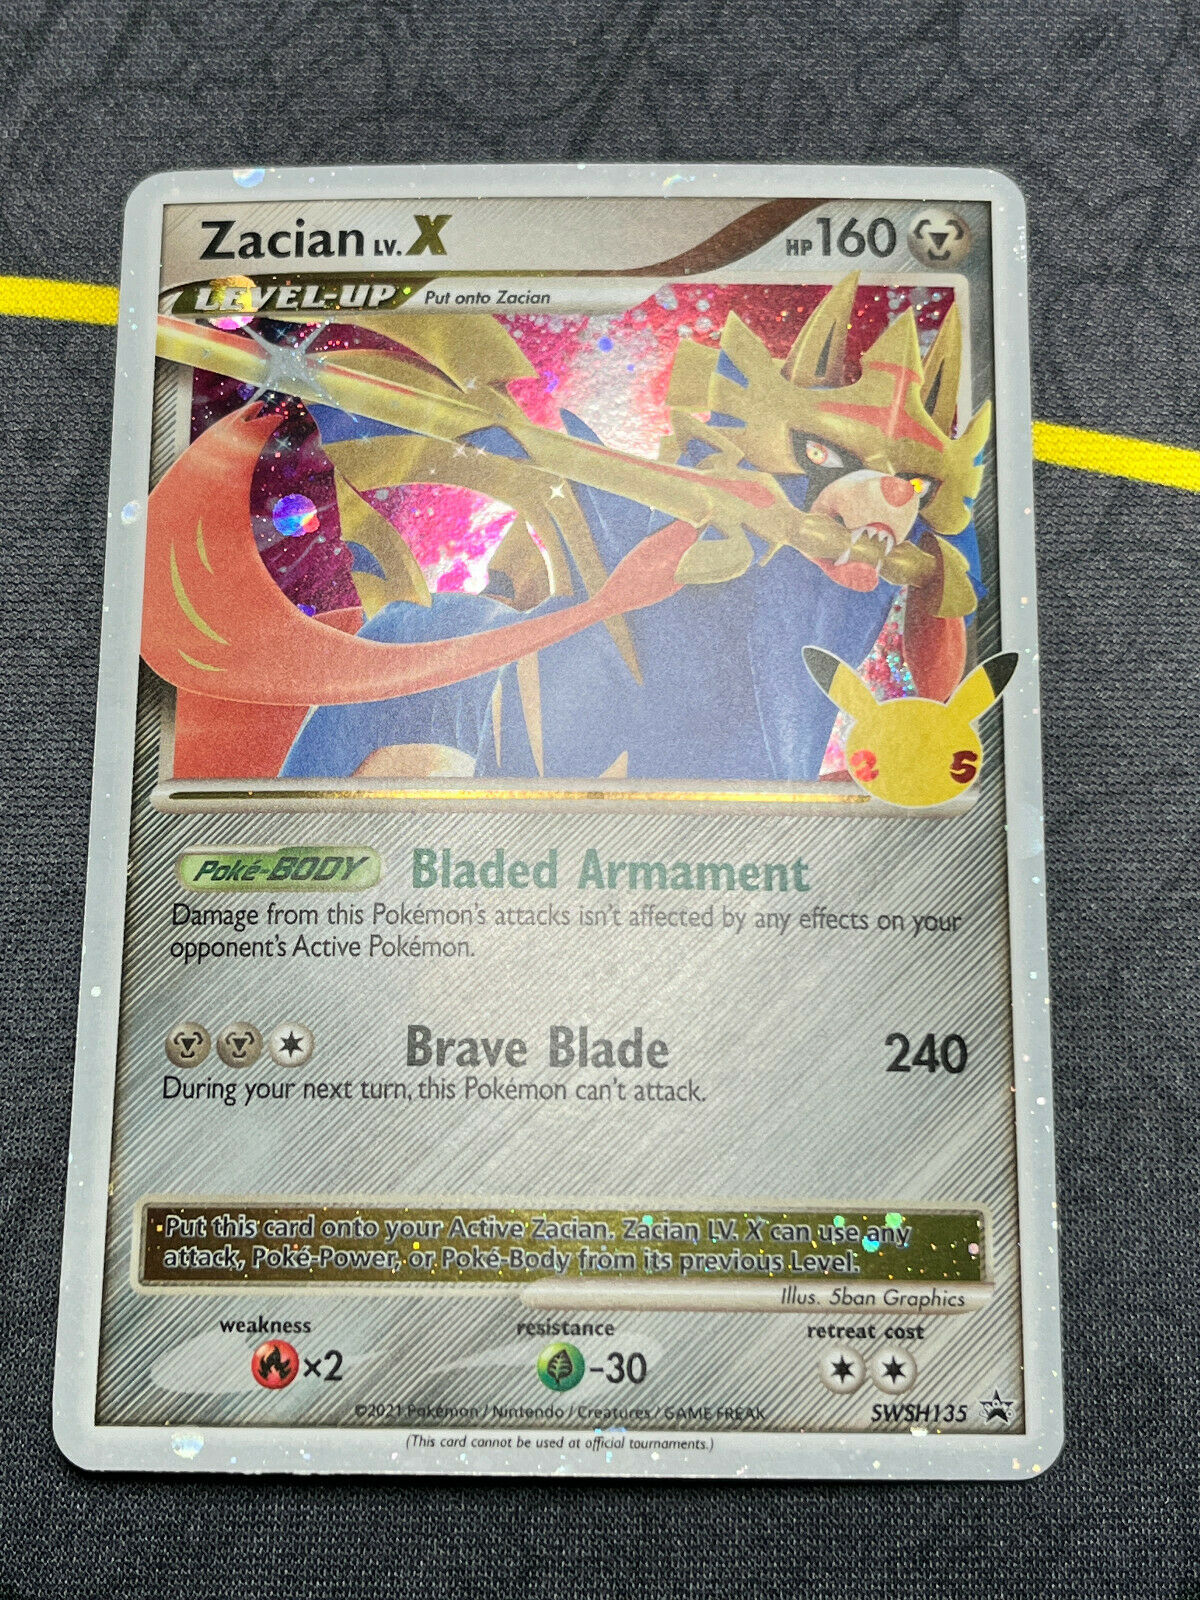 Added the latest Zacian Lv.X to complete my Lv.X collection. : r